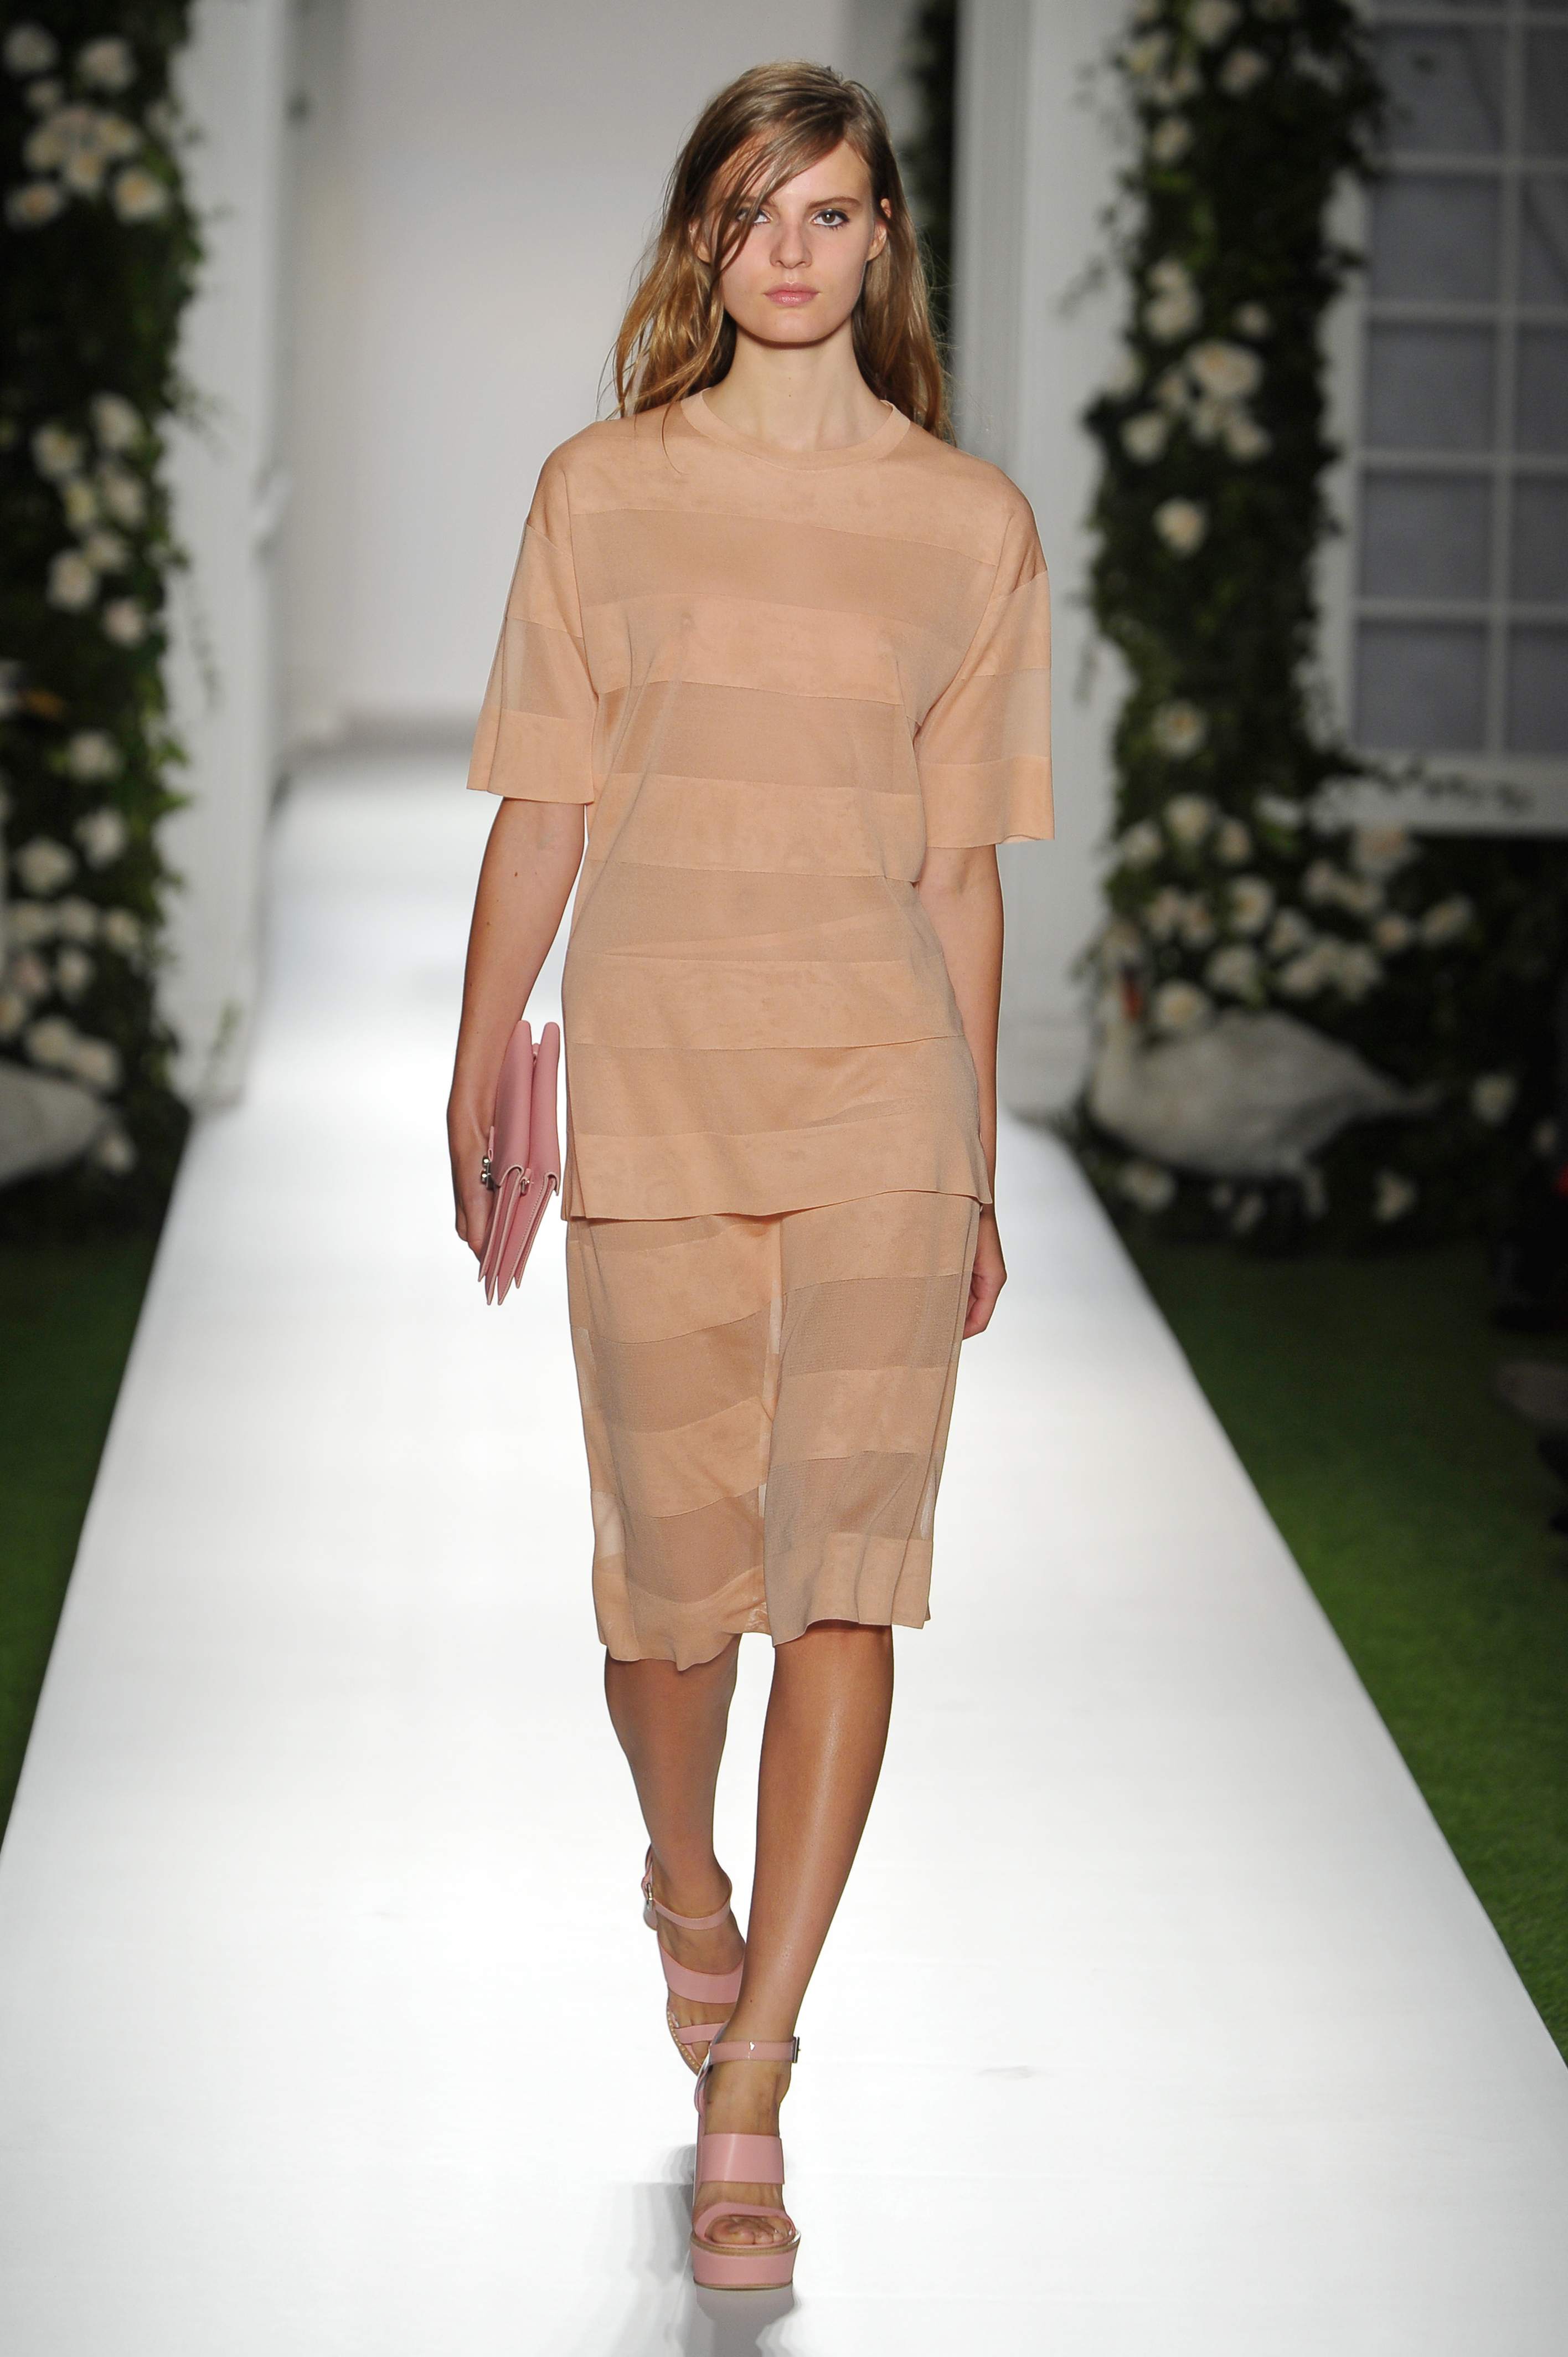 MULLBERRY__Ready_to_wear_spring summer 2014 LONDON_september_2013